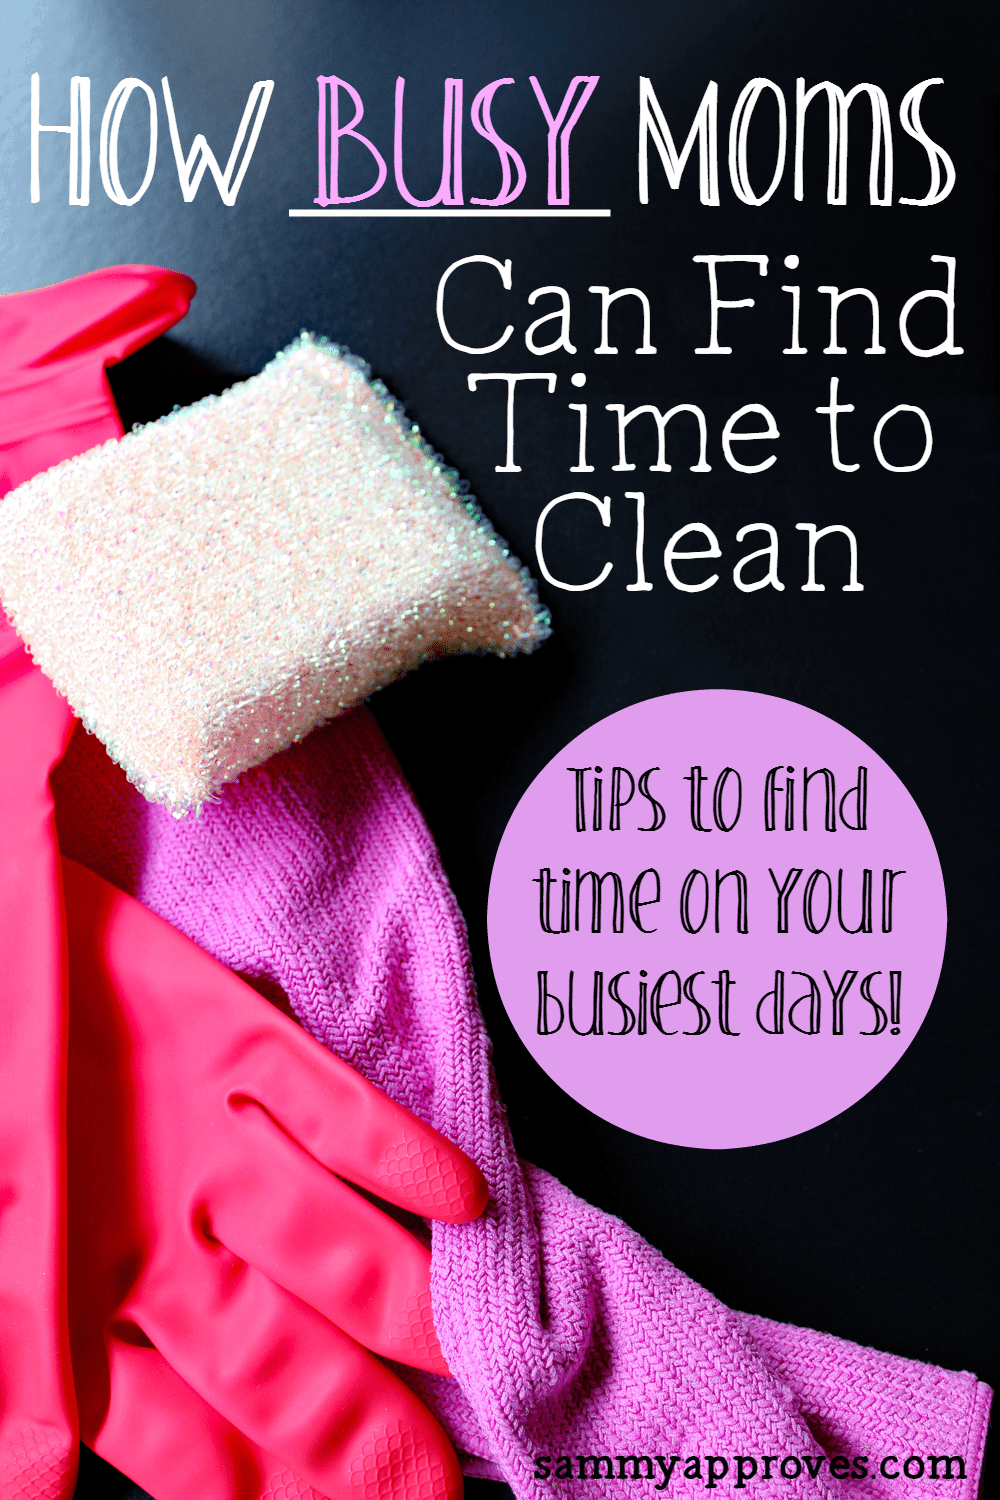 How Busy Moms Can Find Time to Clean